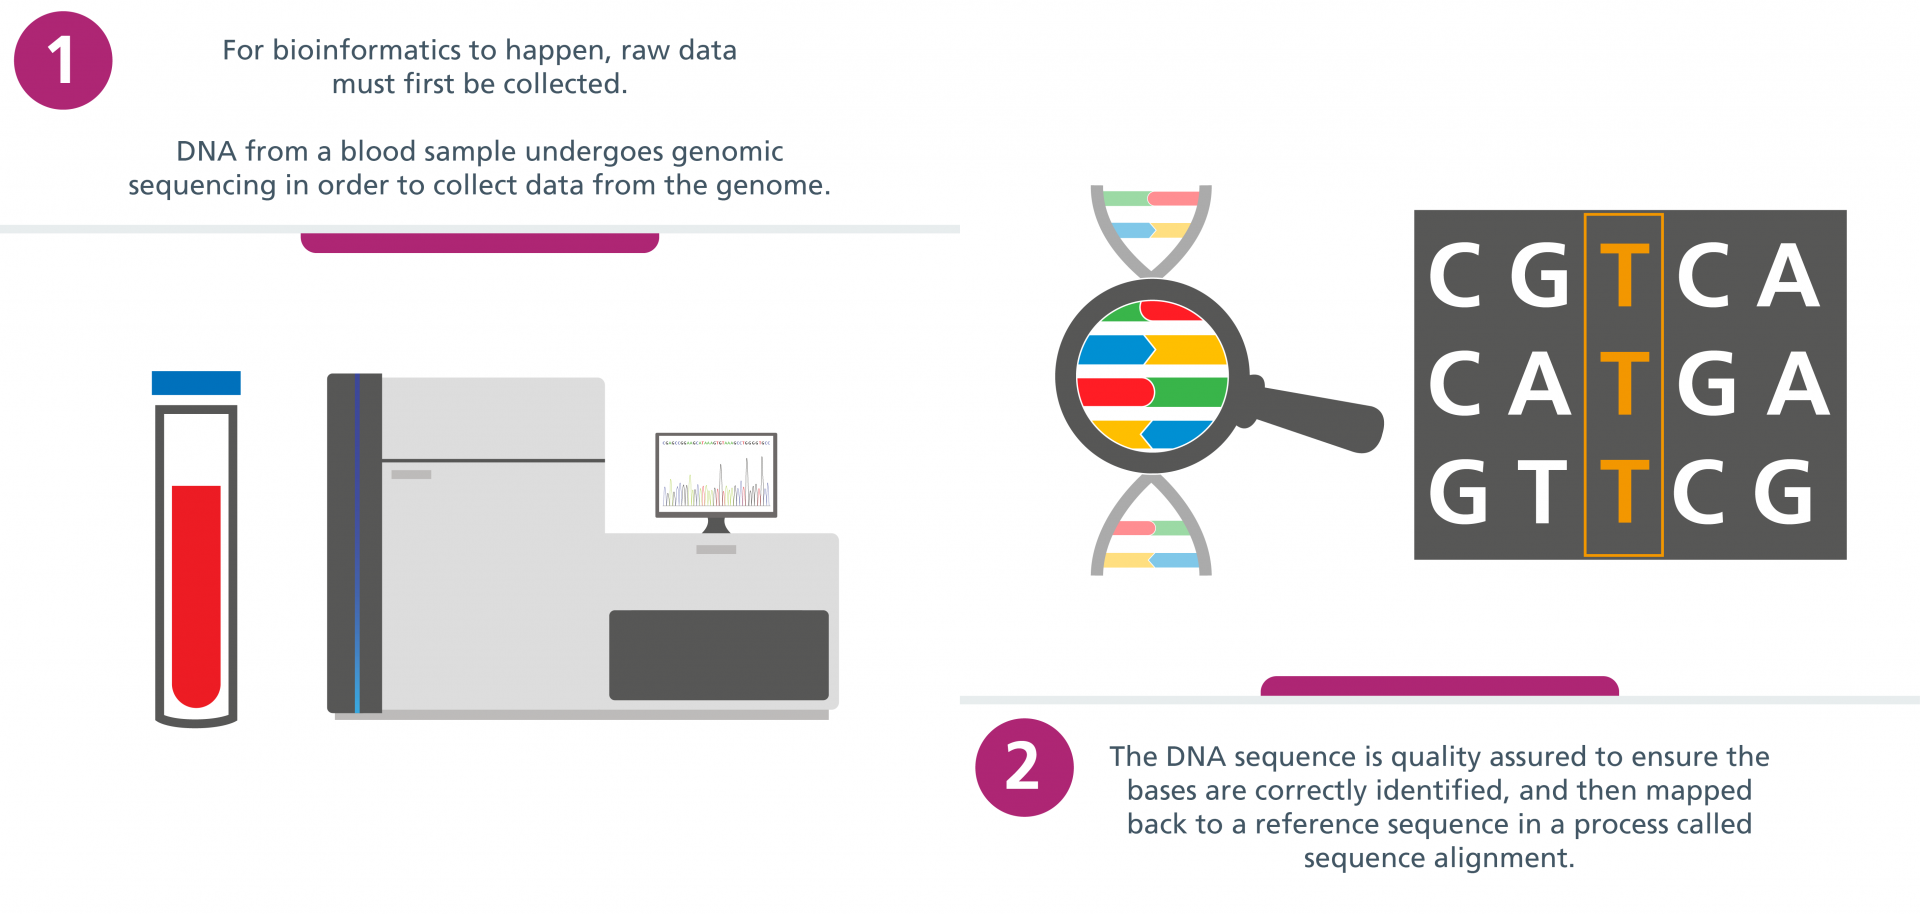 Step 1: For bioinformatics to happen, raw data must first be collected. DNA from a blood sample undergoes genomic sequencing in order to collect data from the genome. Step 2: The DNA sequence is quality assured to ensure the bases are correctly identified, and then mapped back to a reference sequence in a process called sequence alignment.